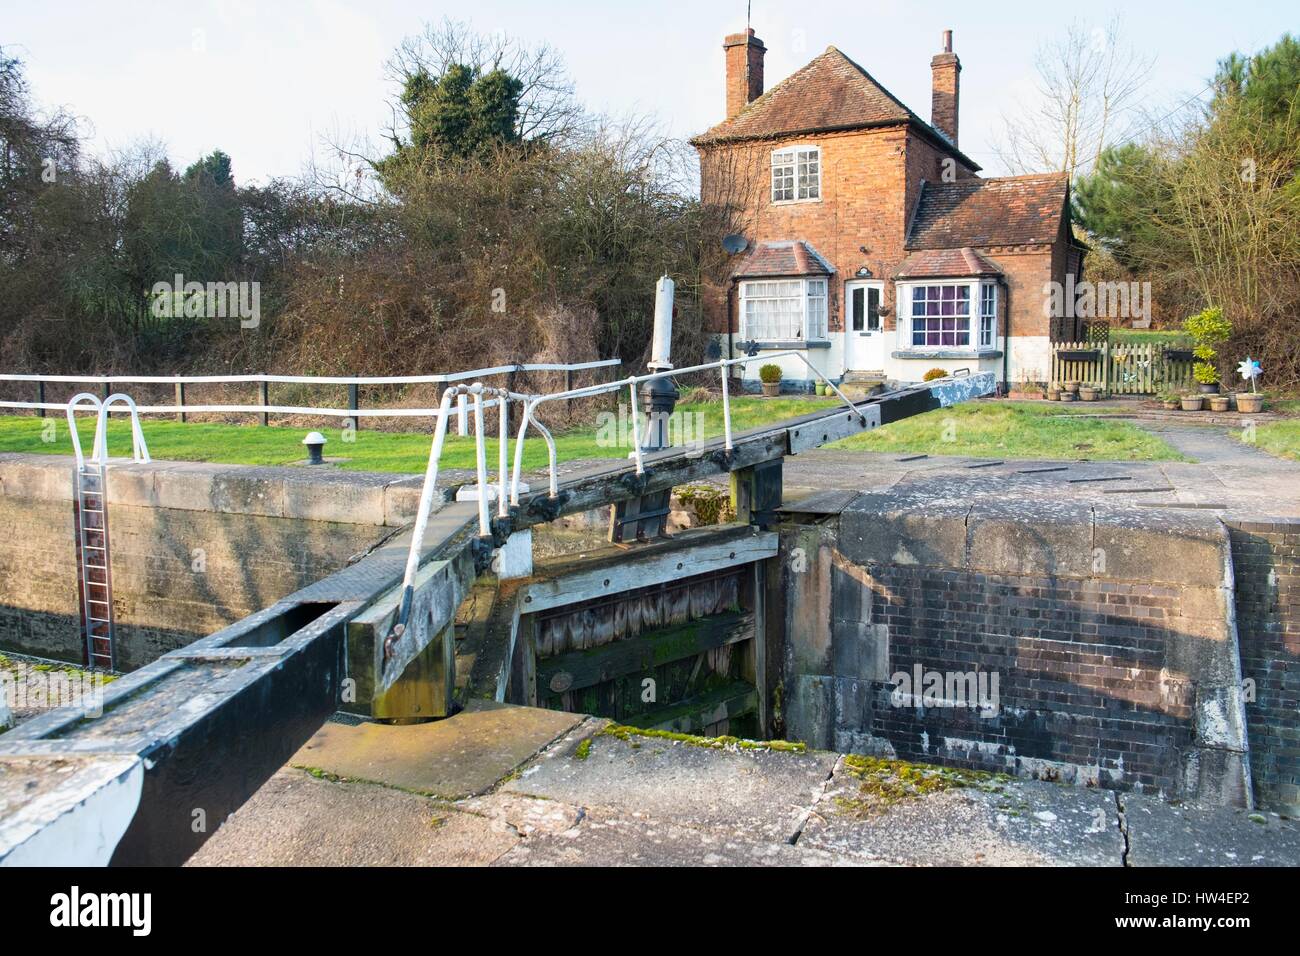 Lock keepers cottage and lock on the Grand Union Canal in Hatton, Warwickshire, England. Stock Photo